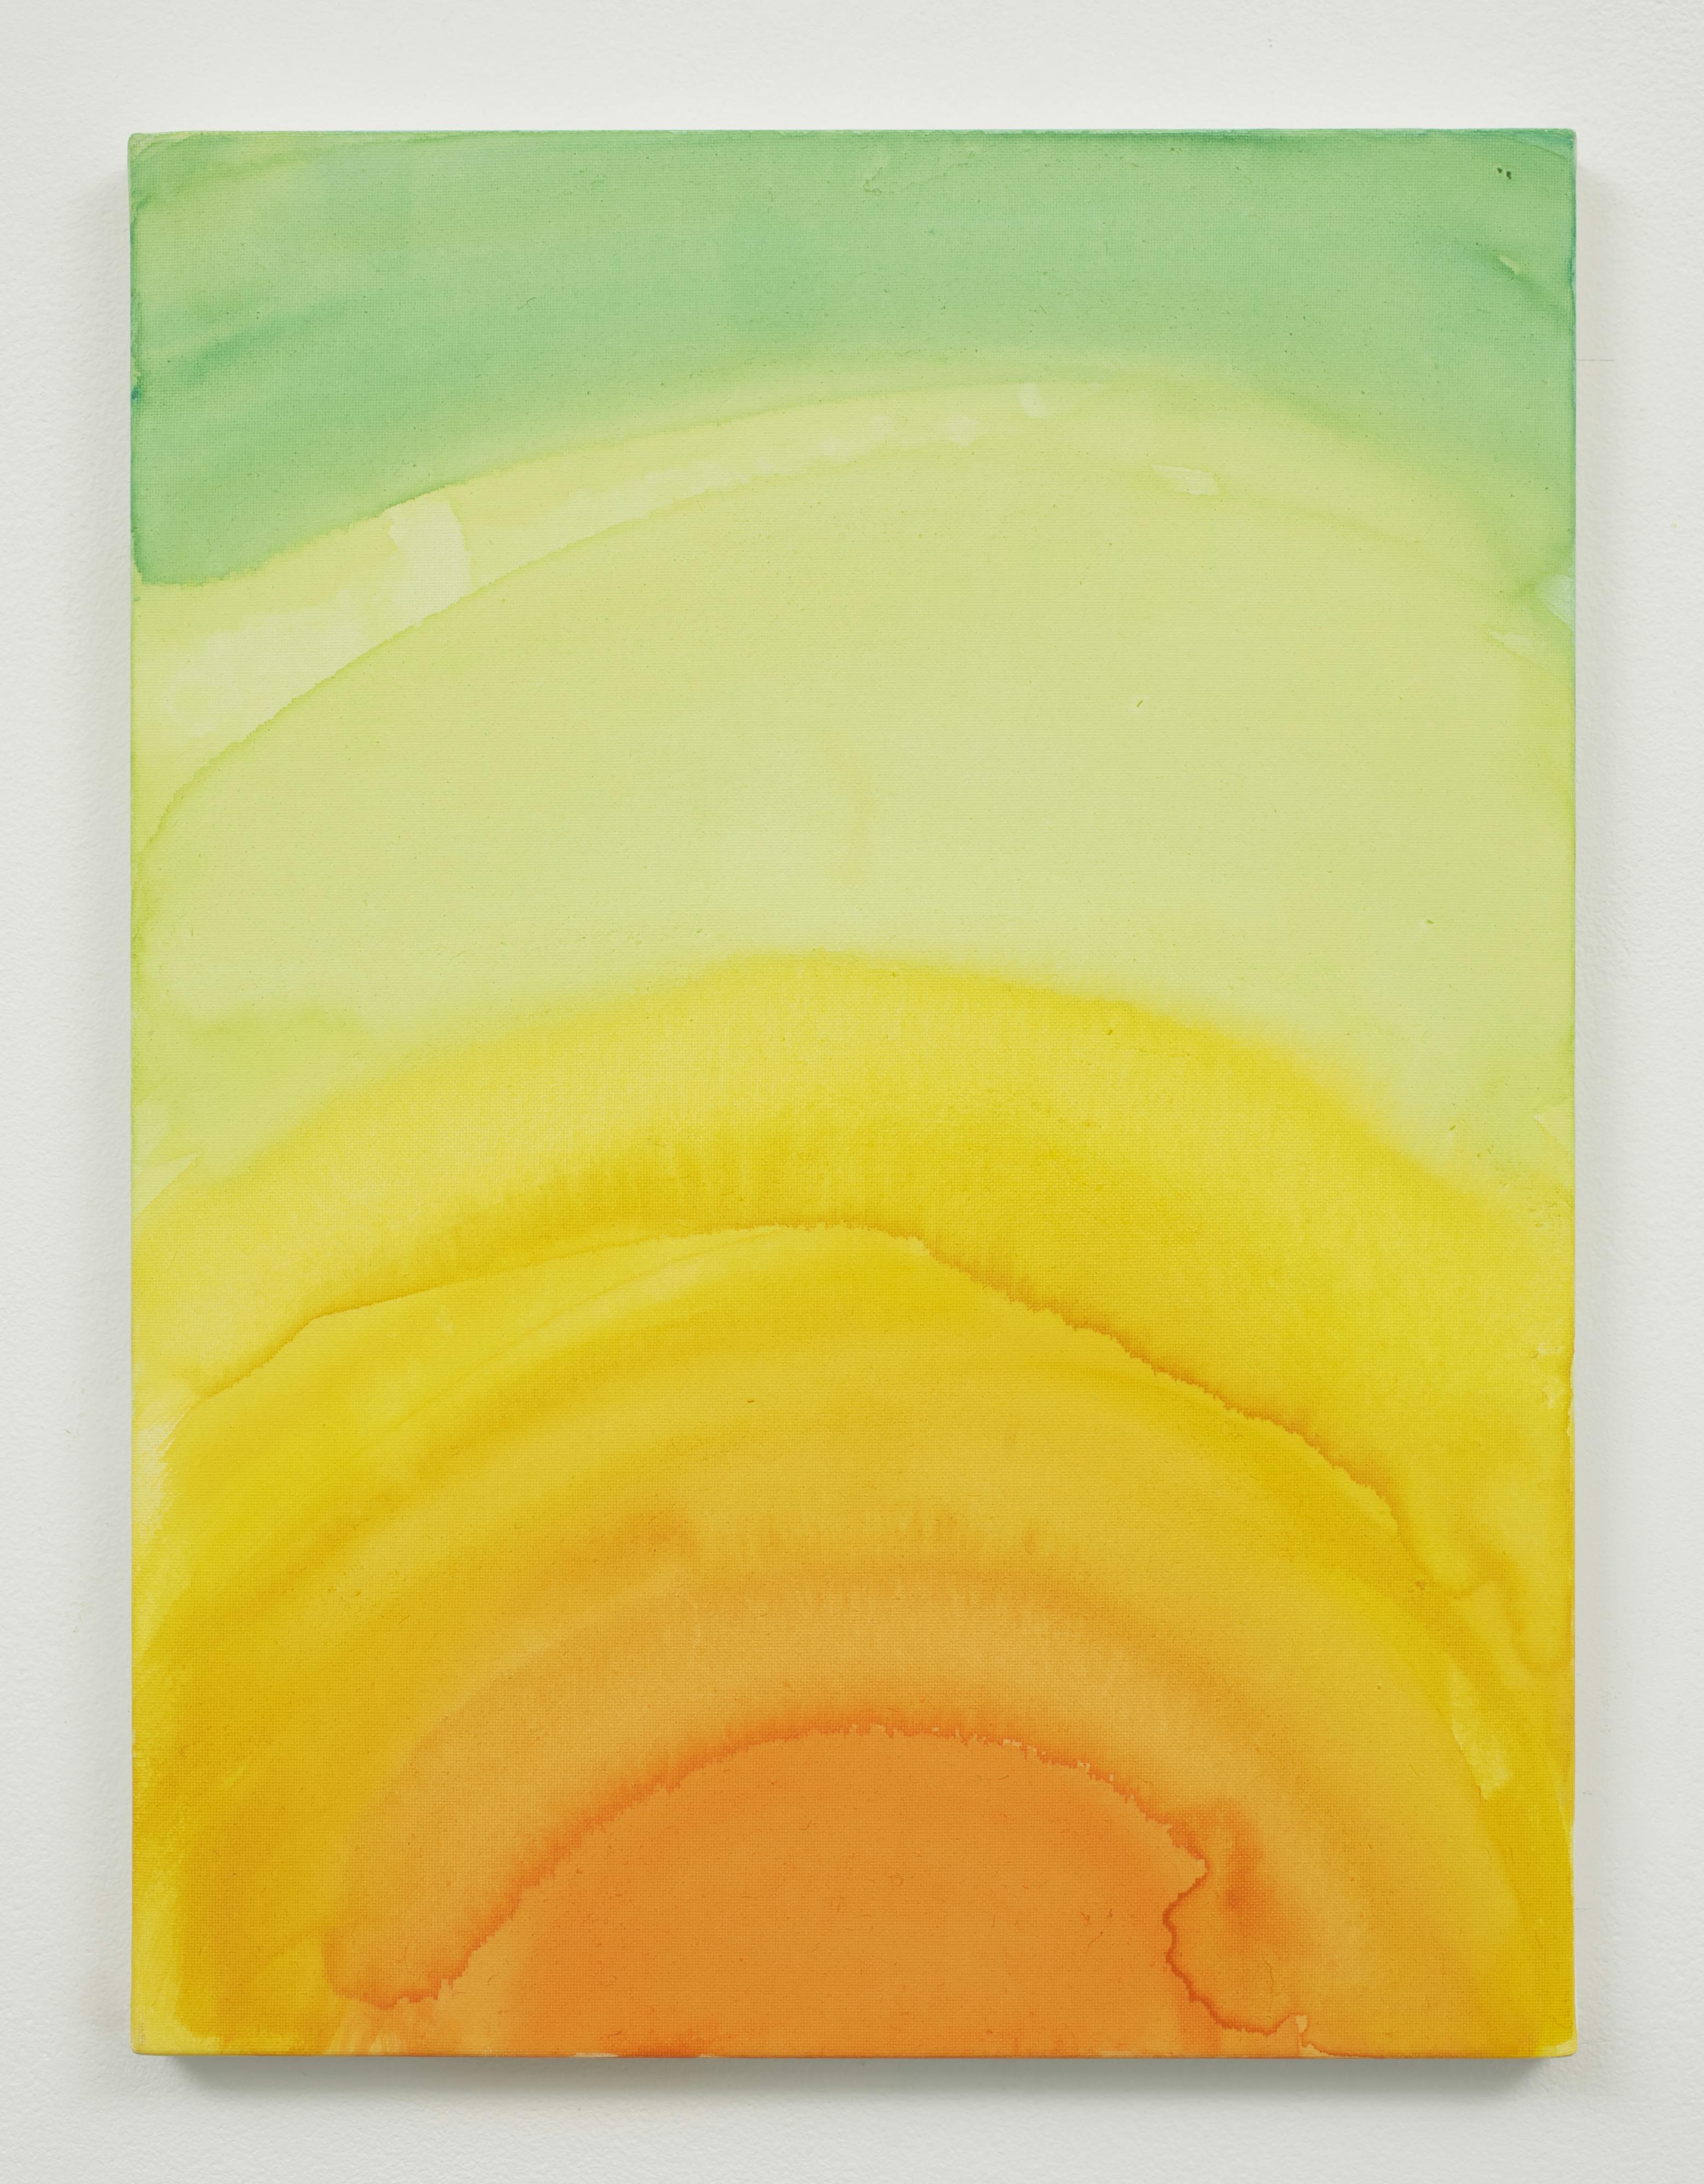 An abstract painting of orange, yellow and shades of green reminiscent of a sunrise.